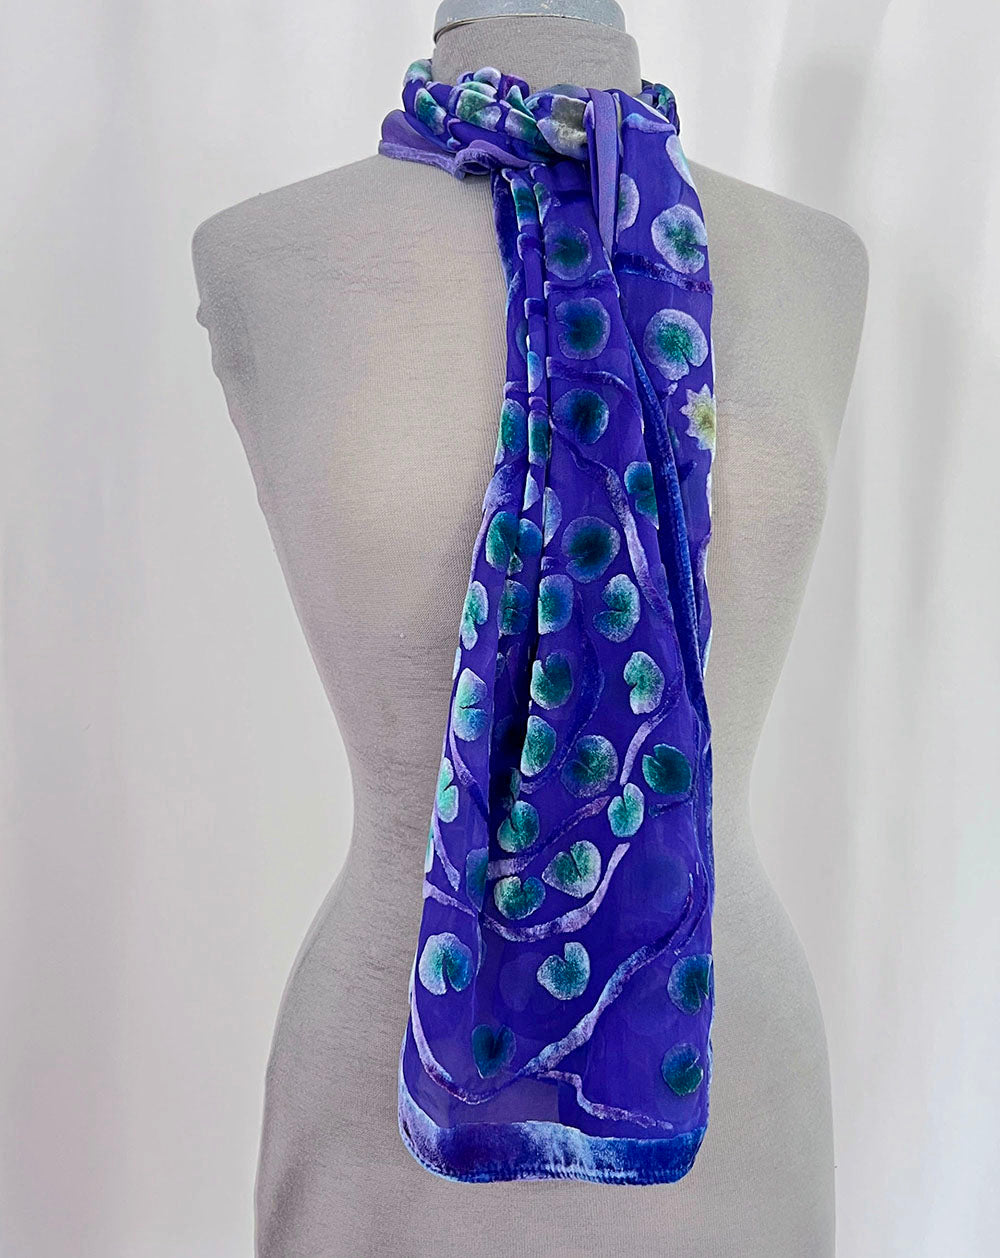 Hand Painted Multi Color Paisley Print Silk Scarf 